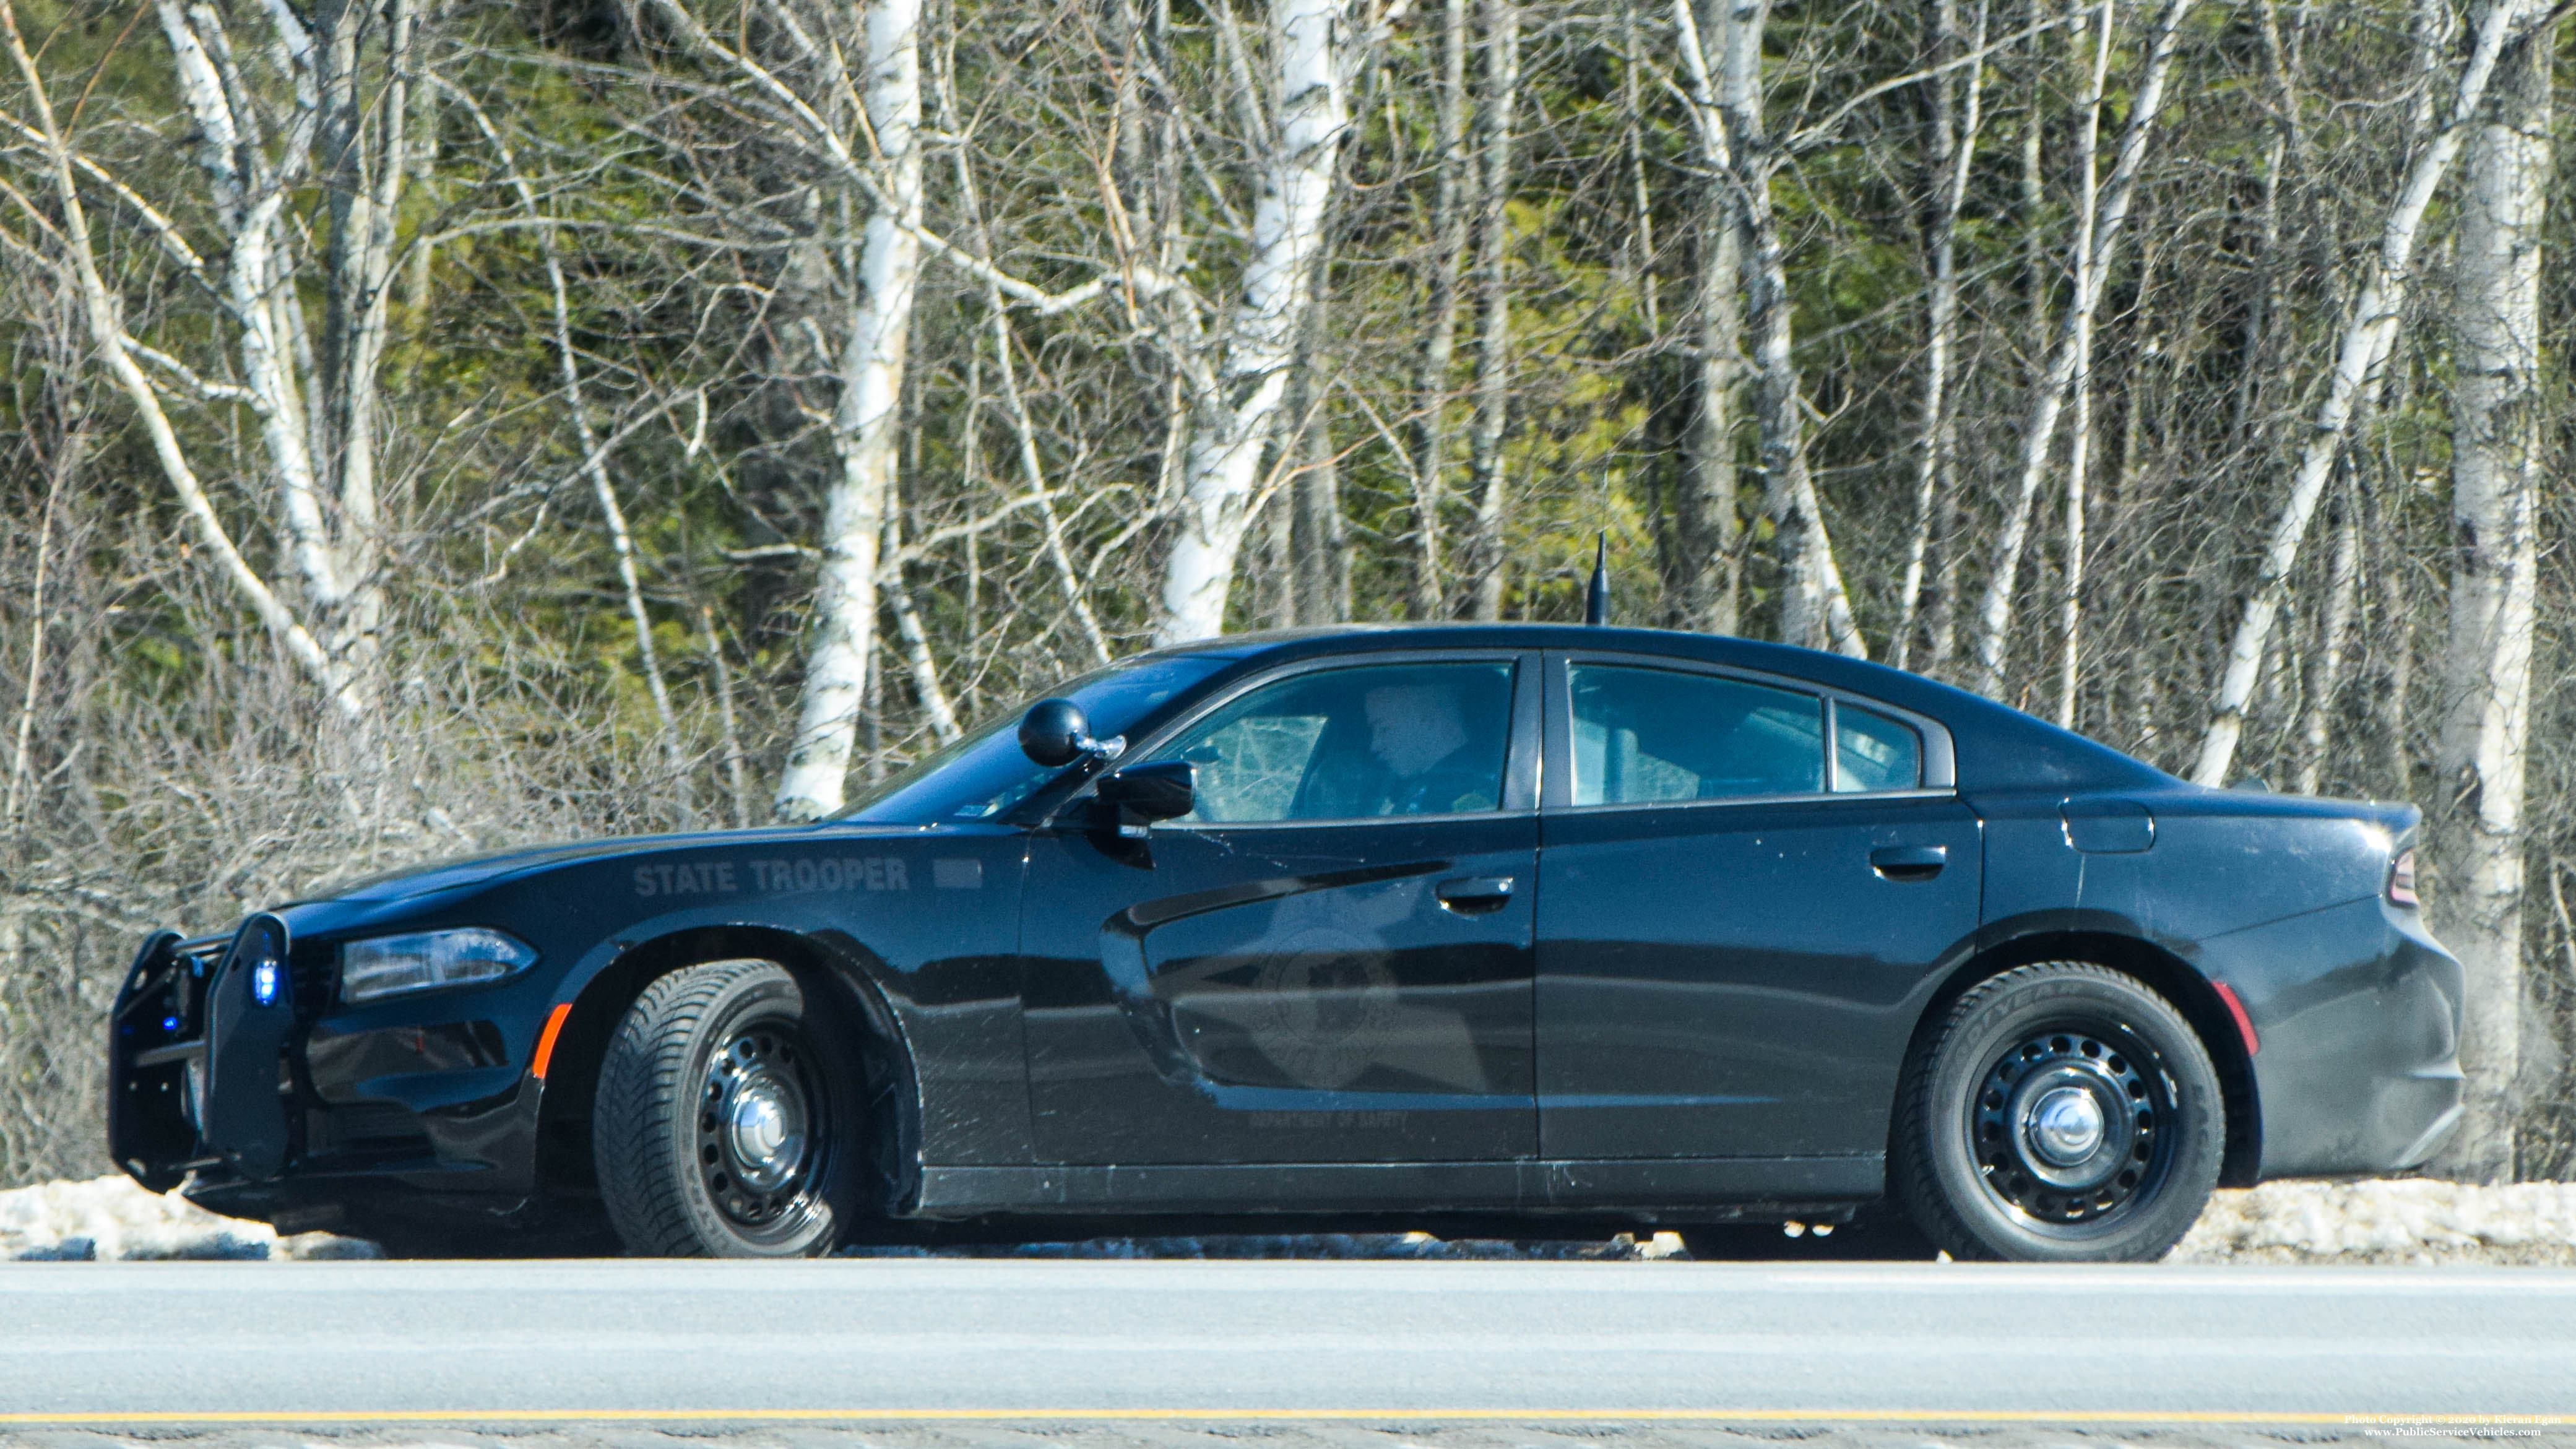 A photo  of New Hampshire State Police
            Cruiser 519, a 2015-2019 Dodge Charger             taken by Kieran Egan